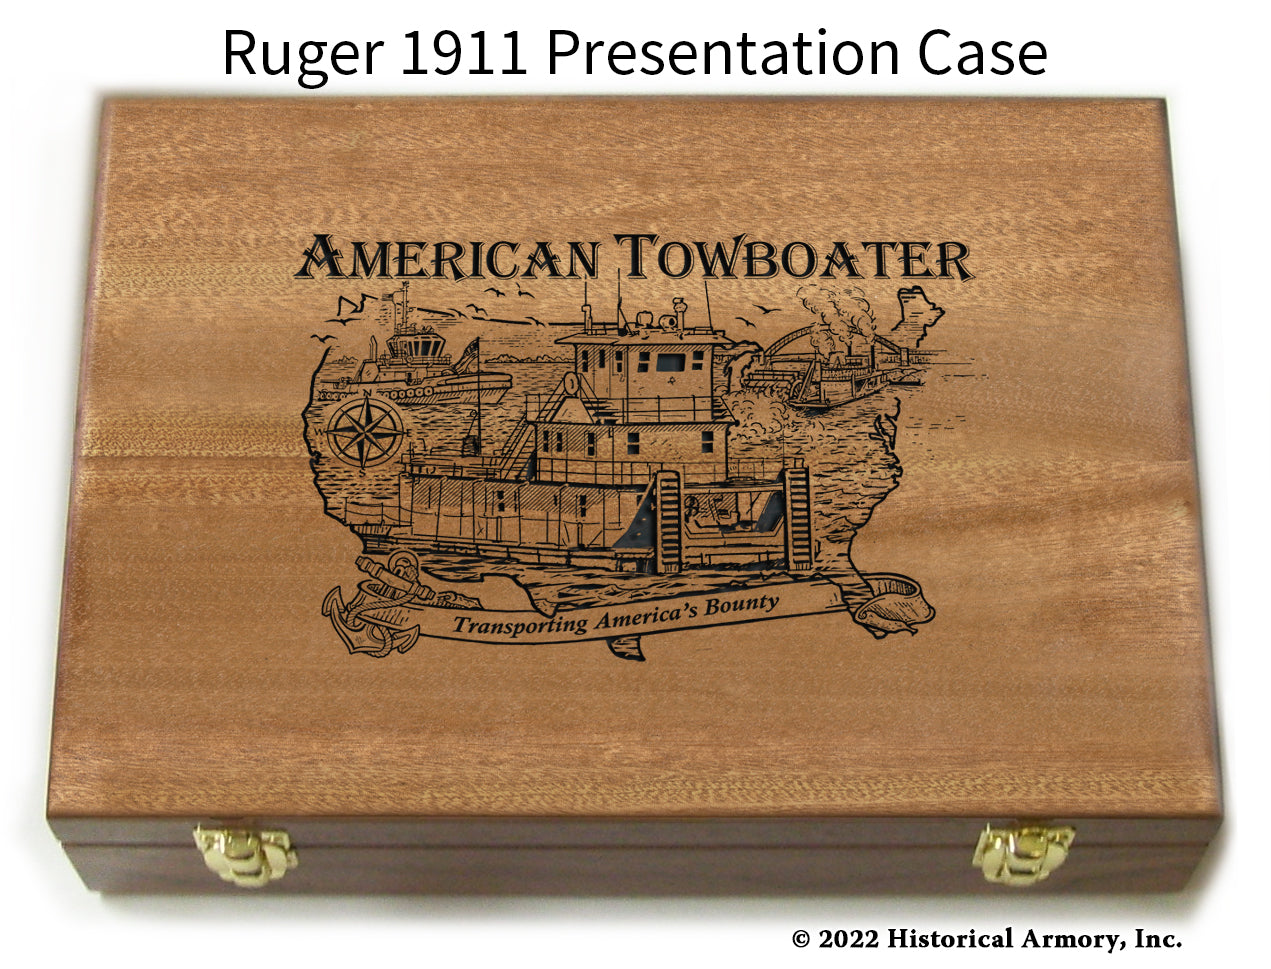 American Towboater Engraved Presentation Case Ruger .45 Auto 1911